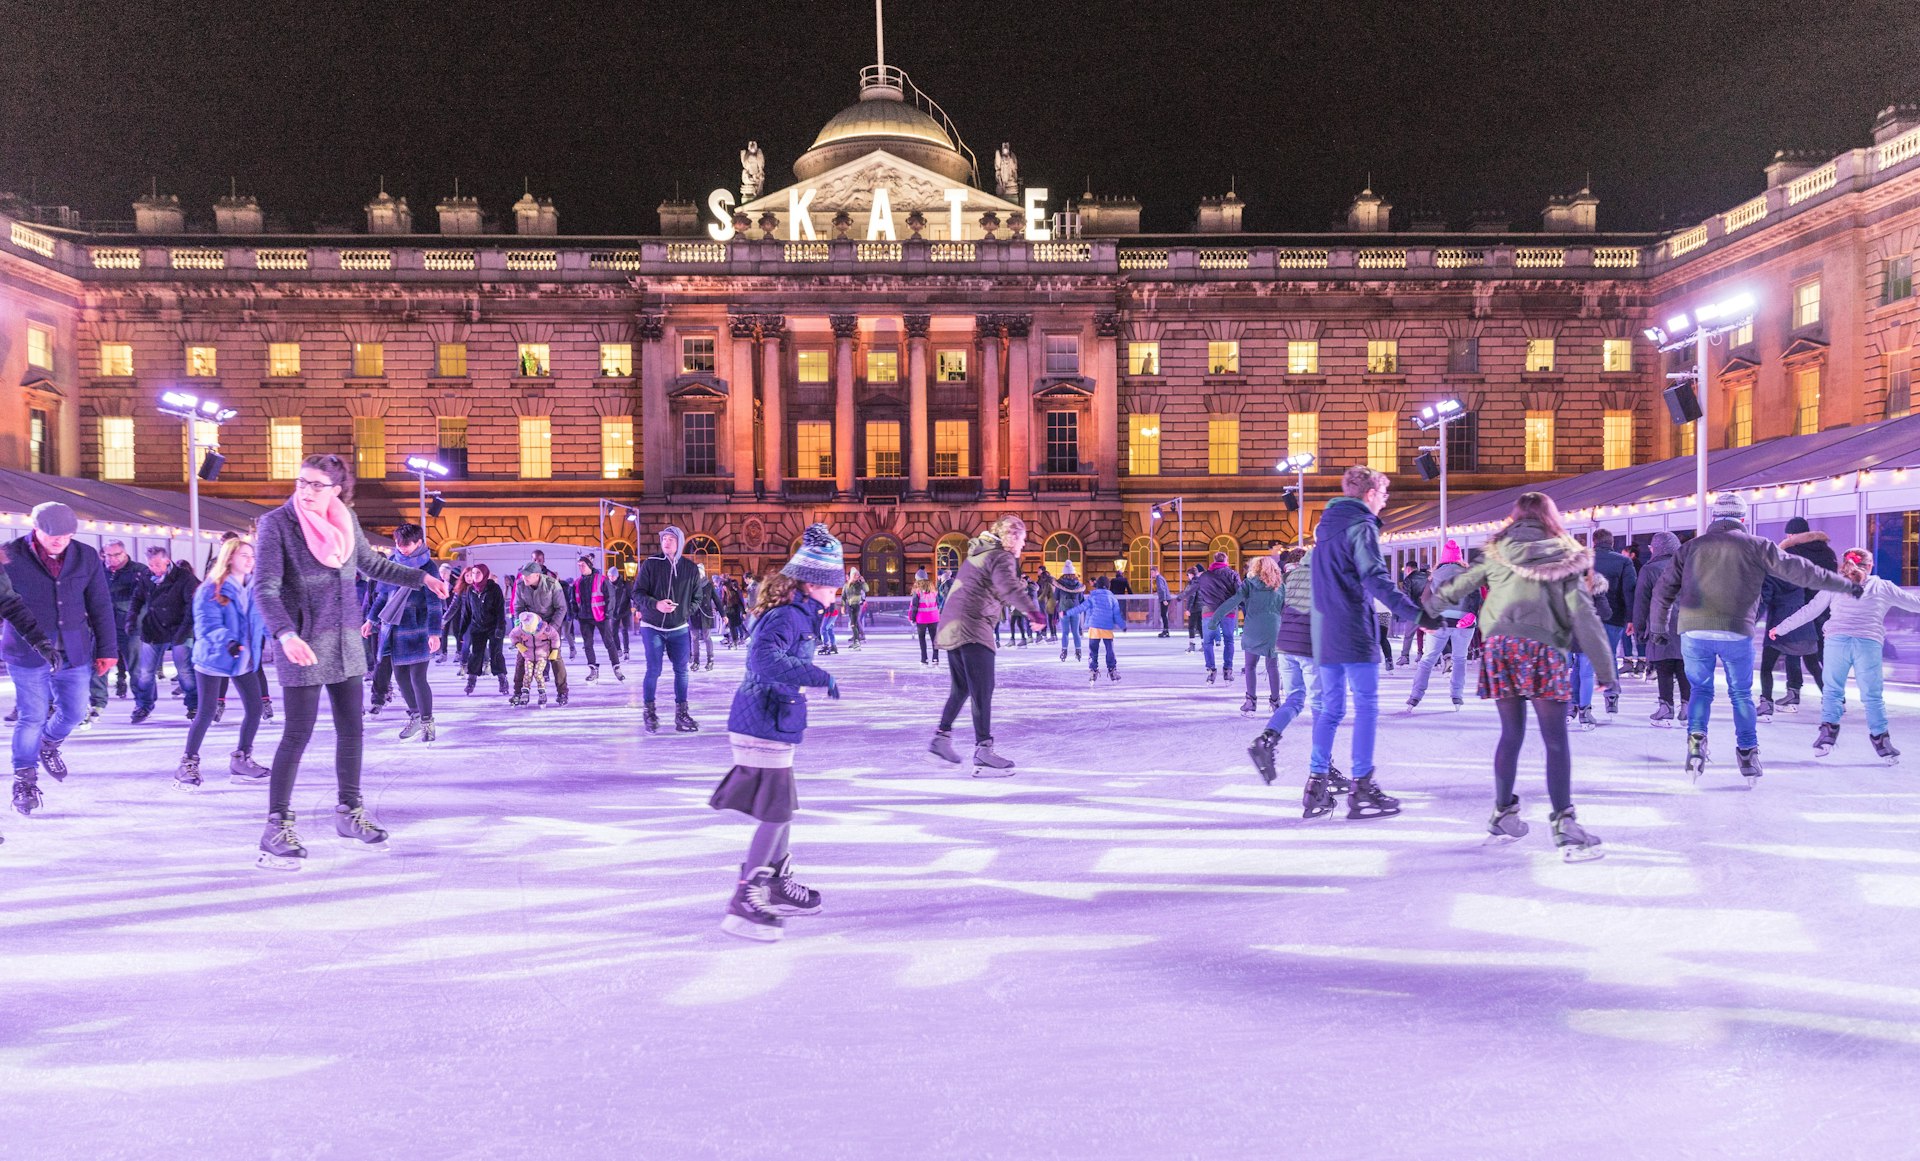 Skaters on the ice outside Somerset House in London